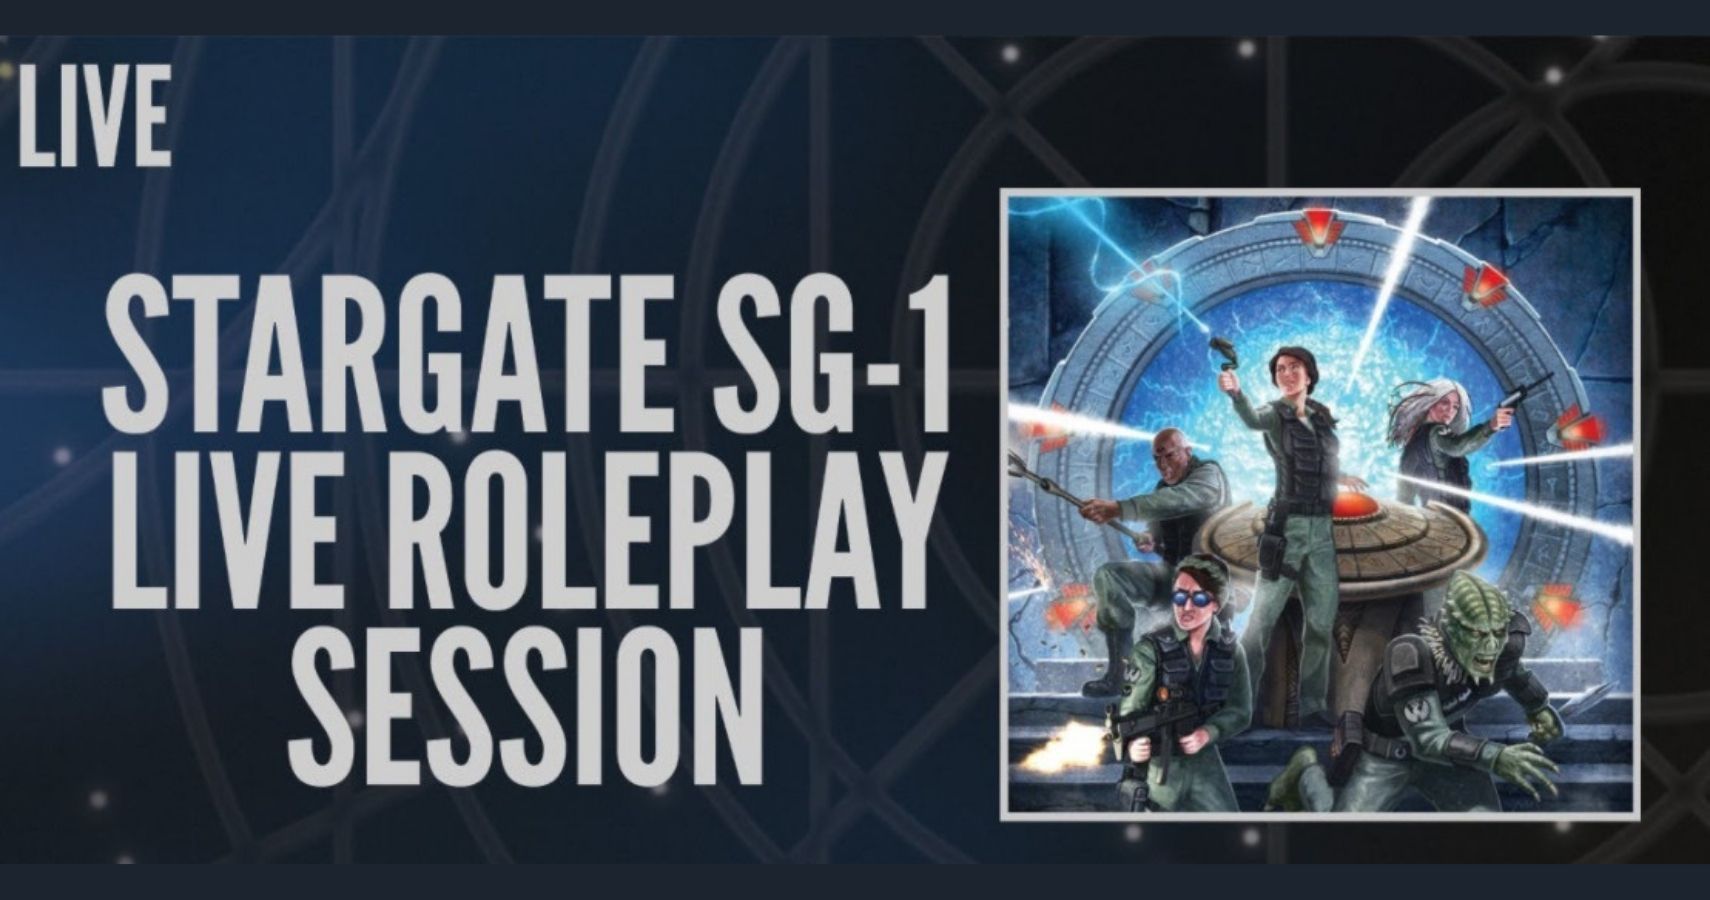 Watch Six Stargate Cast Members Play The Stargate RPG On October 18